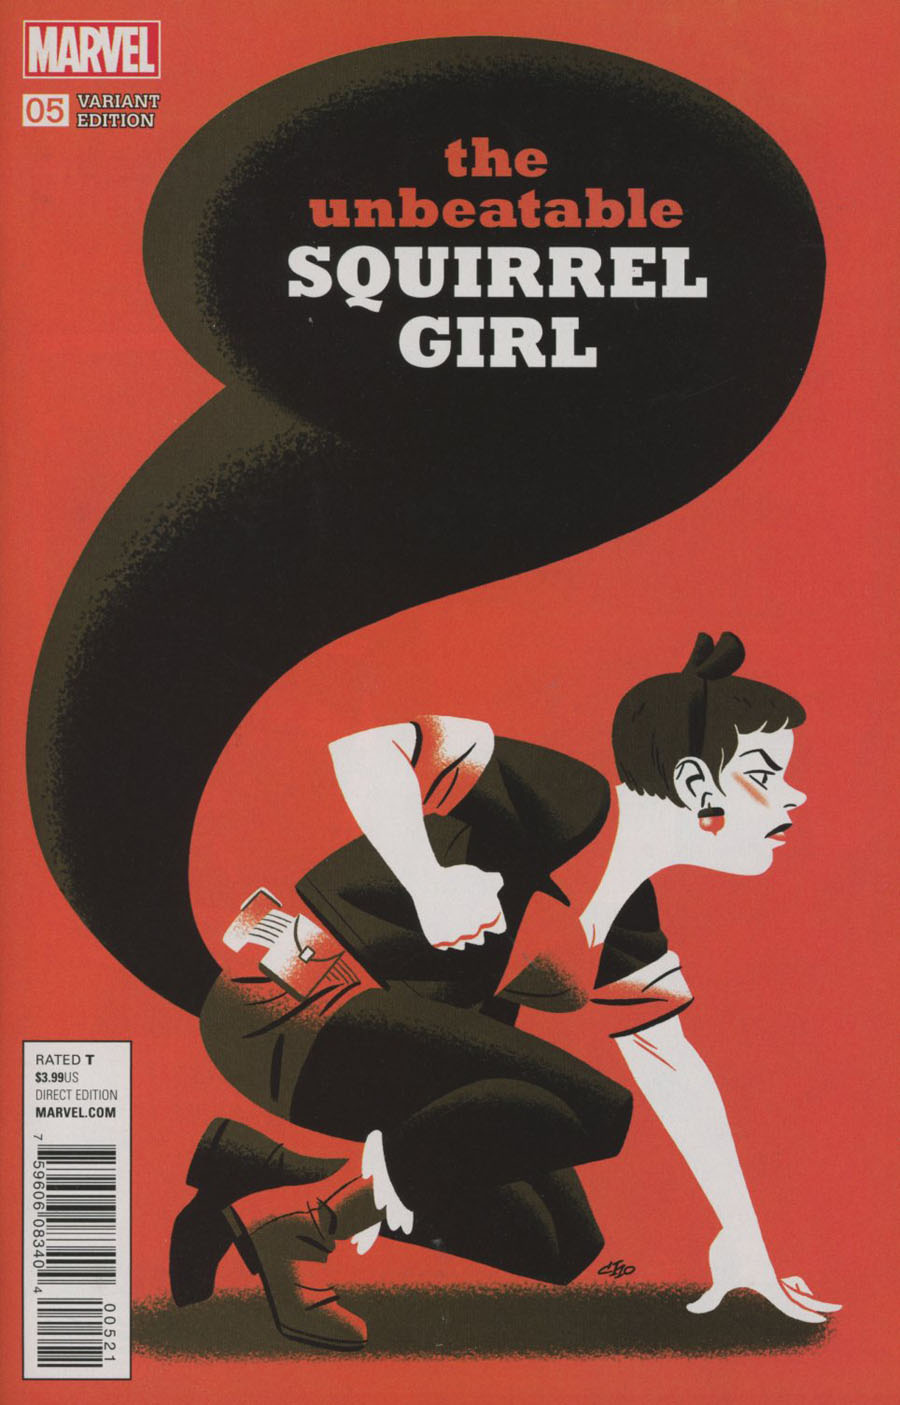 Unbeatable Squirrel Girl Vol 2 #5 Cover B Incentive Michael Cho Variant Cover